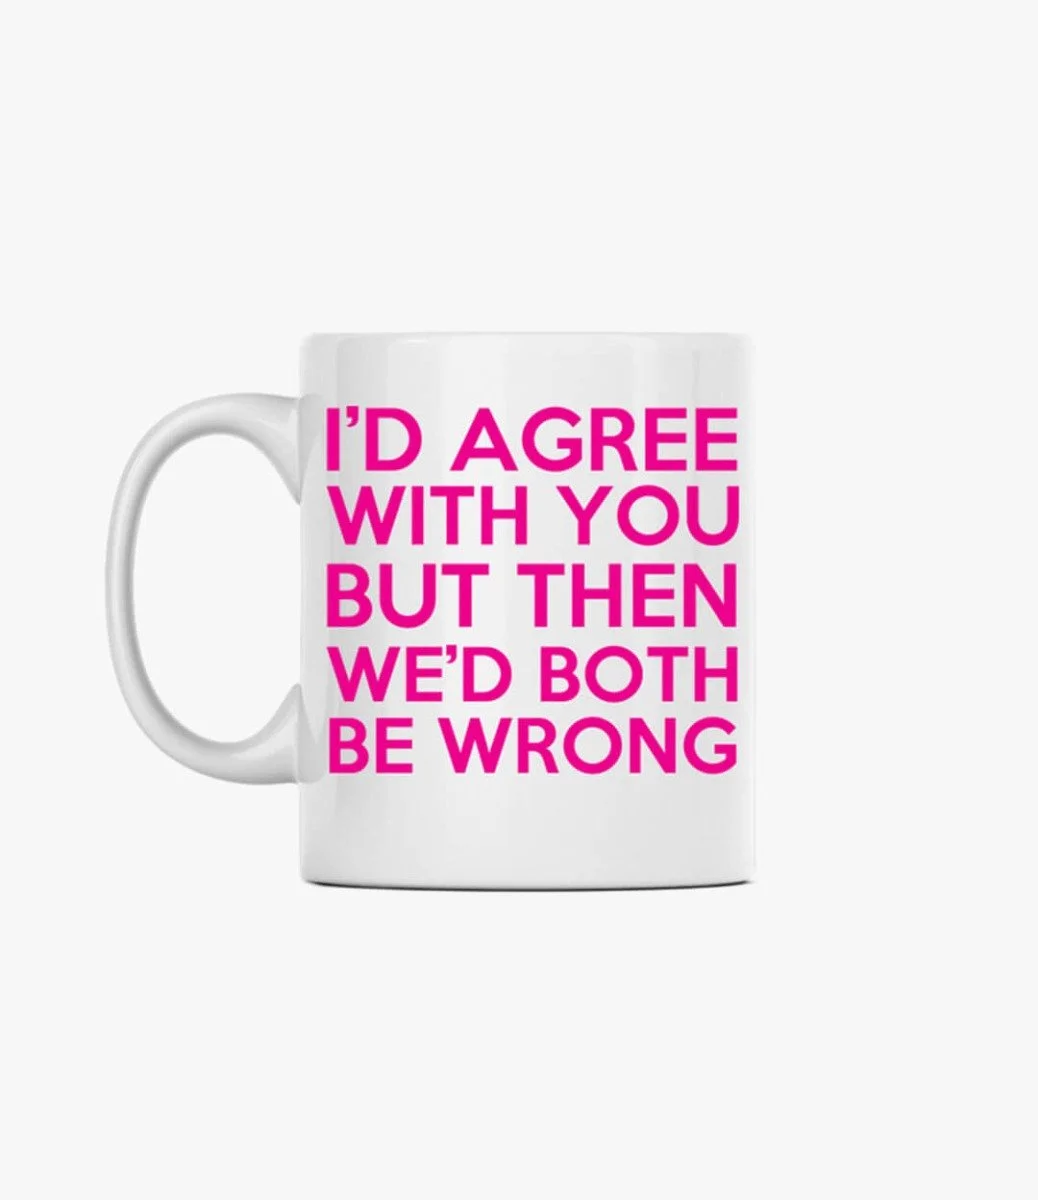 I'd agree with you but then we'd both be wrong Mug